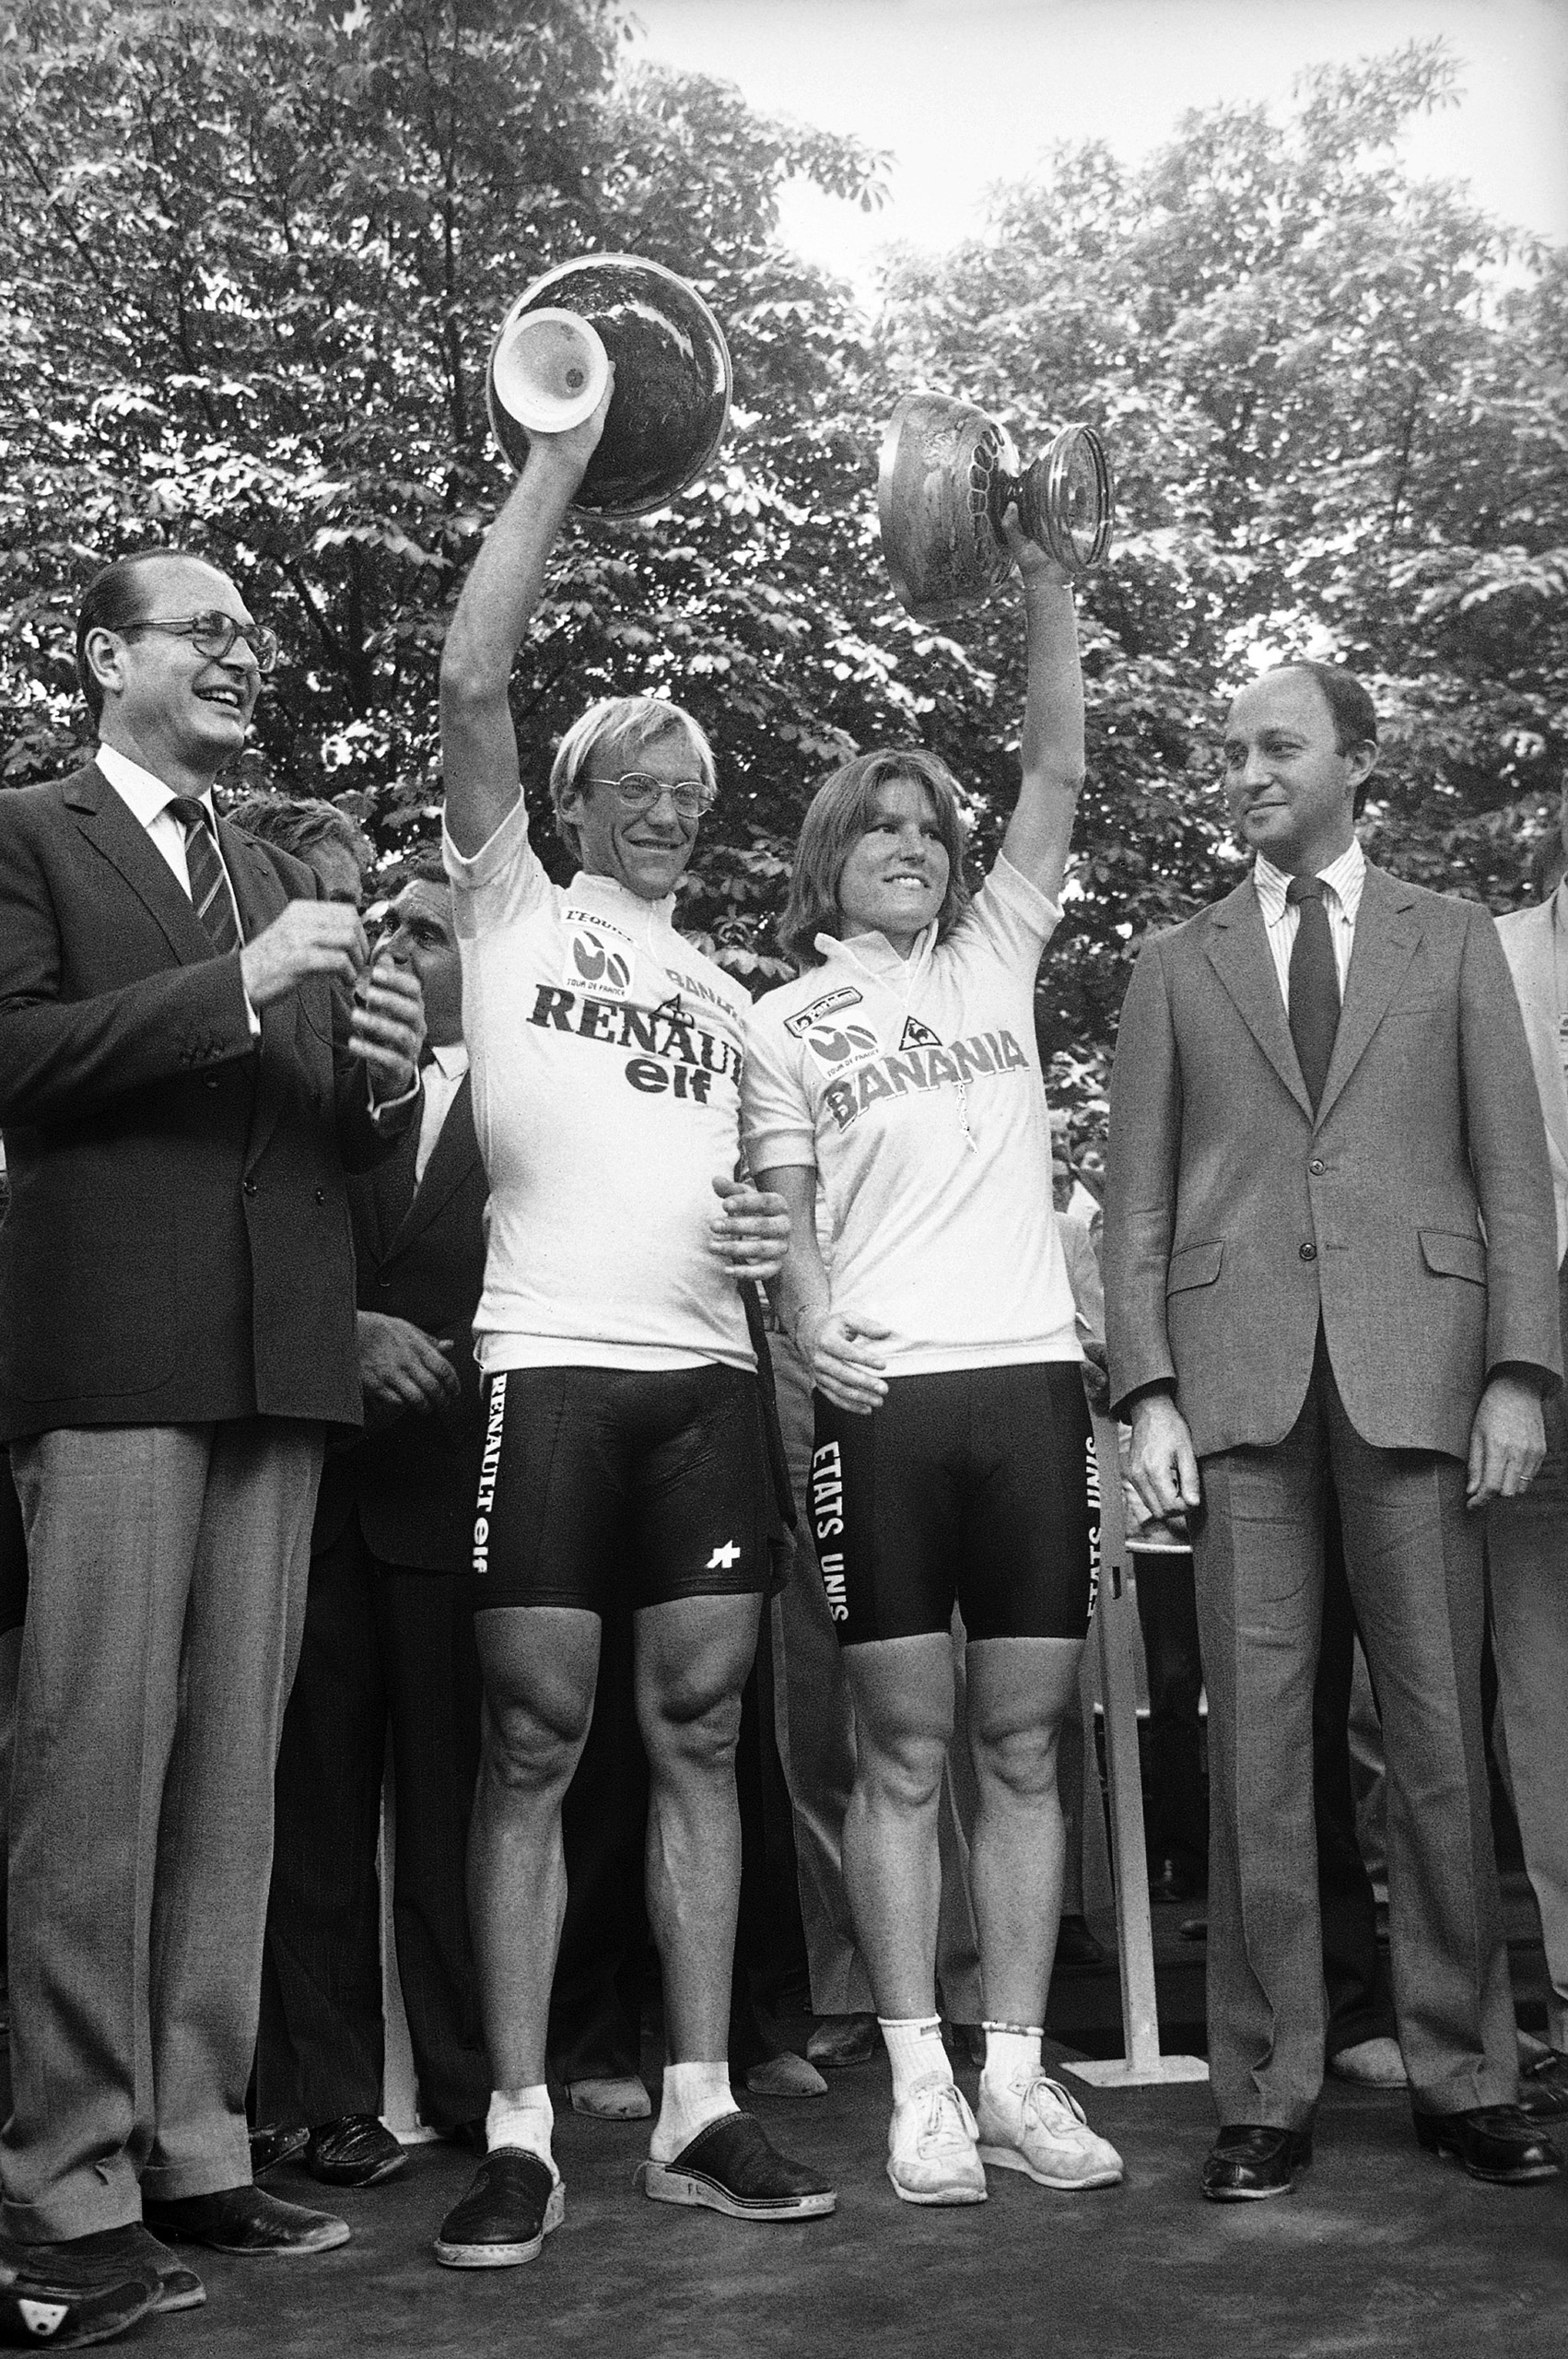 Laurent F. Fignon, left, of France, and Marianne Martin of Boulder, Colorado, hold up their trophies in Paris  Sunday, July 23, 1984 after winning the men’s and women’s Tour de France cycling races. This was the first year for the women’s event.